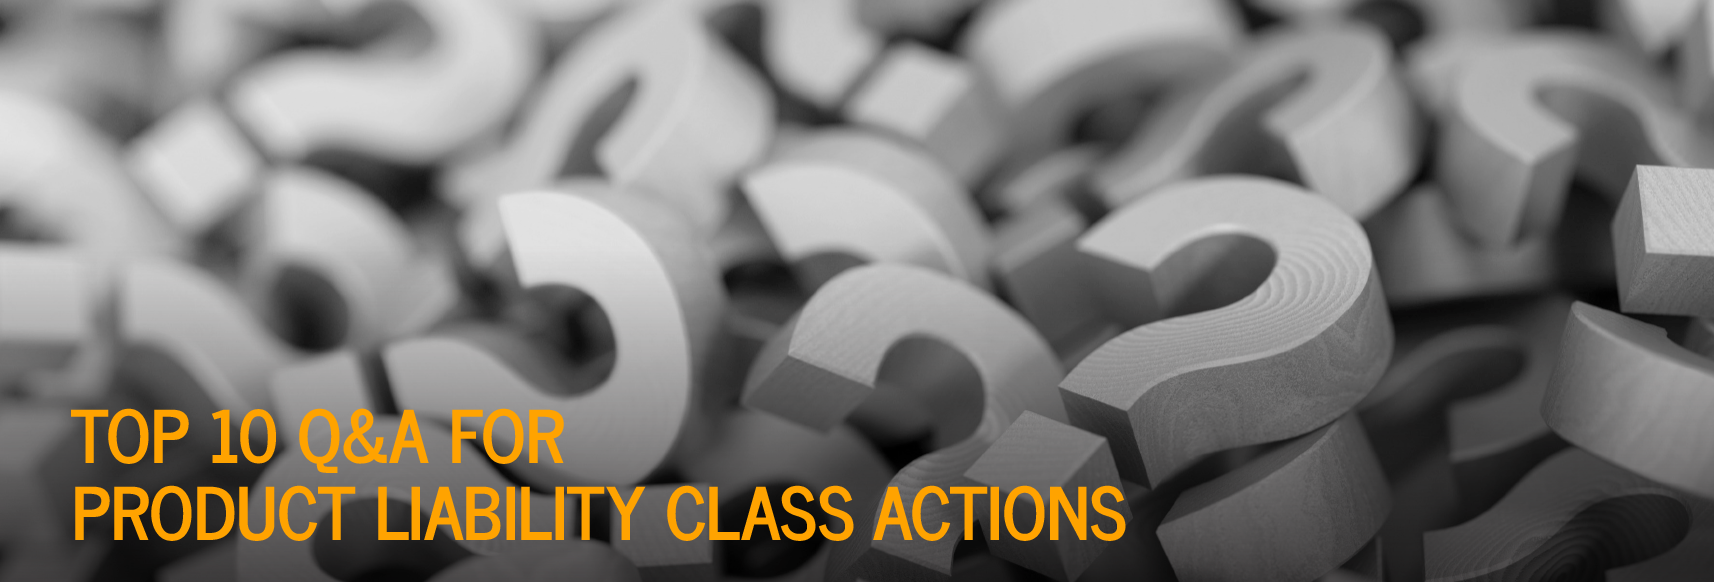 Top 10 Q&A for Product Liability Class Actions image